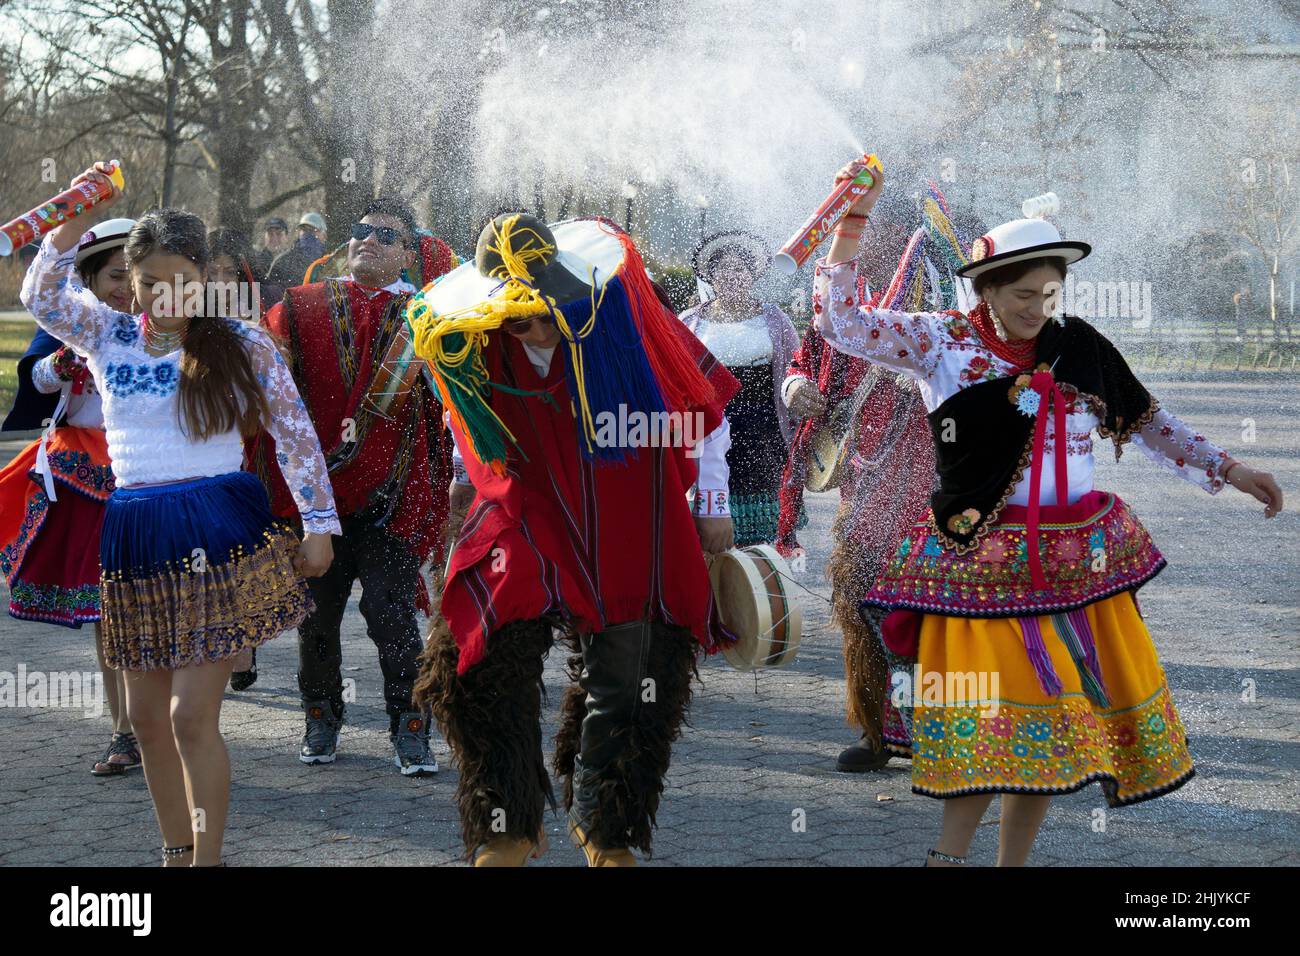 Men and women Ecuadorian New Yorkers dance & play music while spraying Carioca, a shaving cream type spray used in celebrations. In Queens, New York. Stock Photo